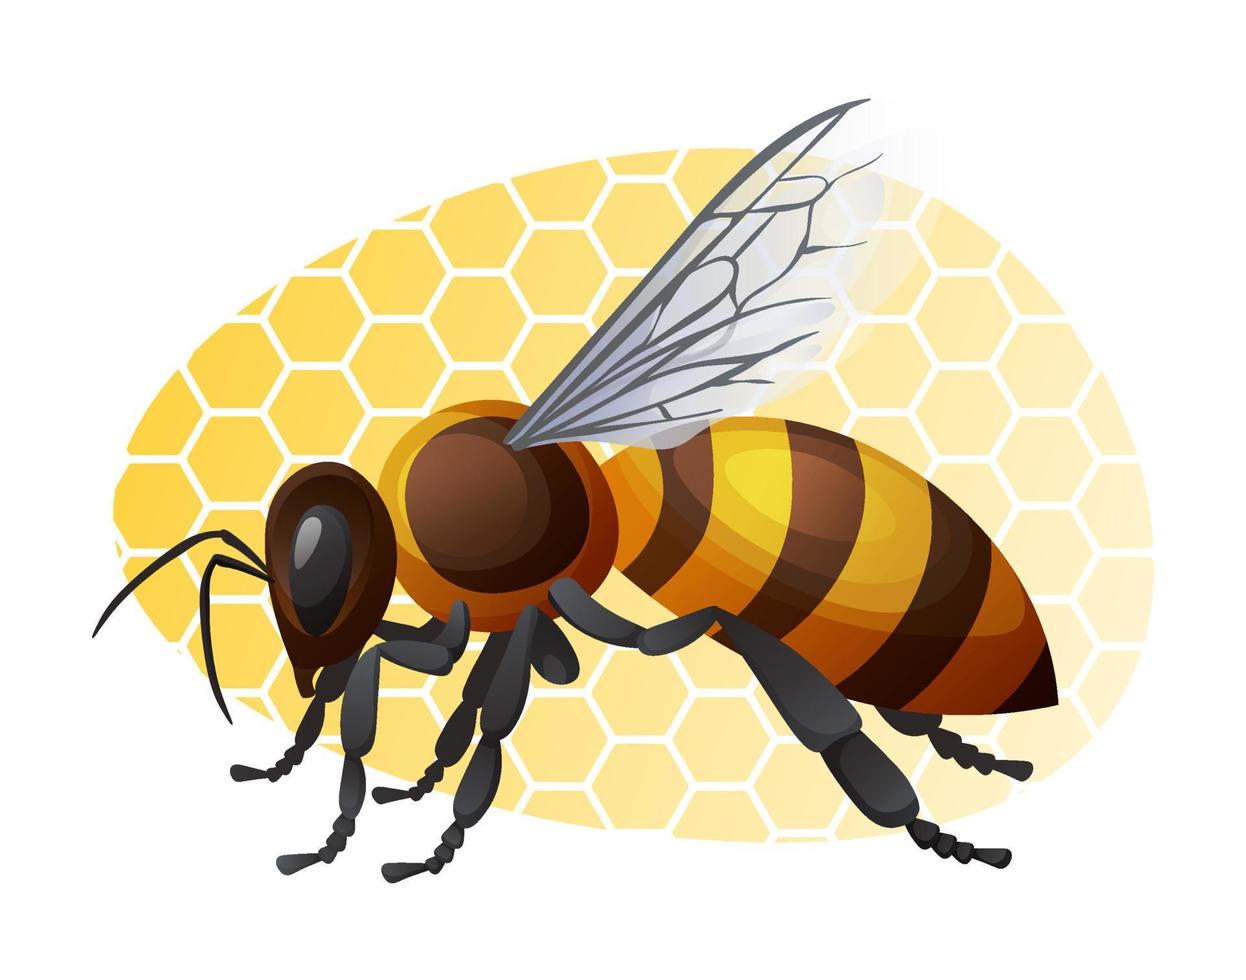 Honey bee on a yellow background.  Striped insect illustration isolated on white background. Sticker, print, logo vector